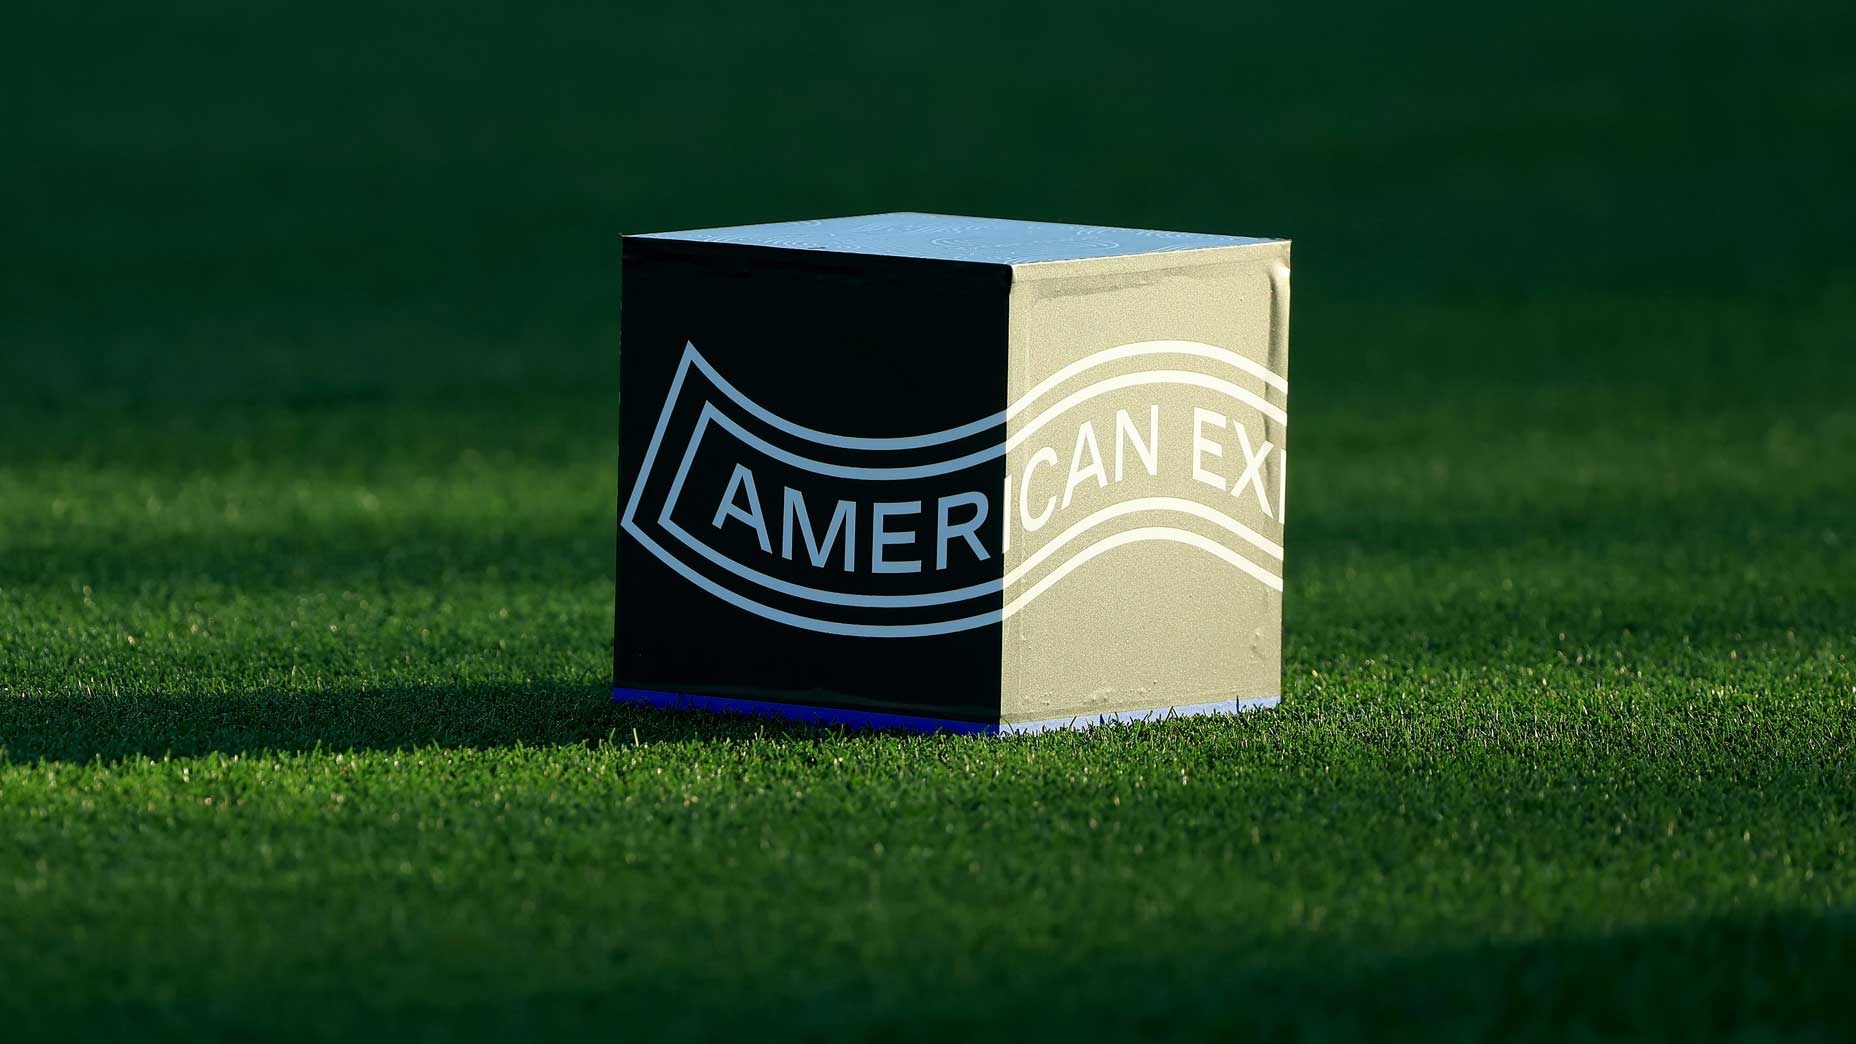 Tee marker for American Express golf tournament